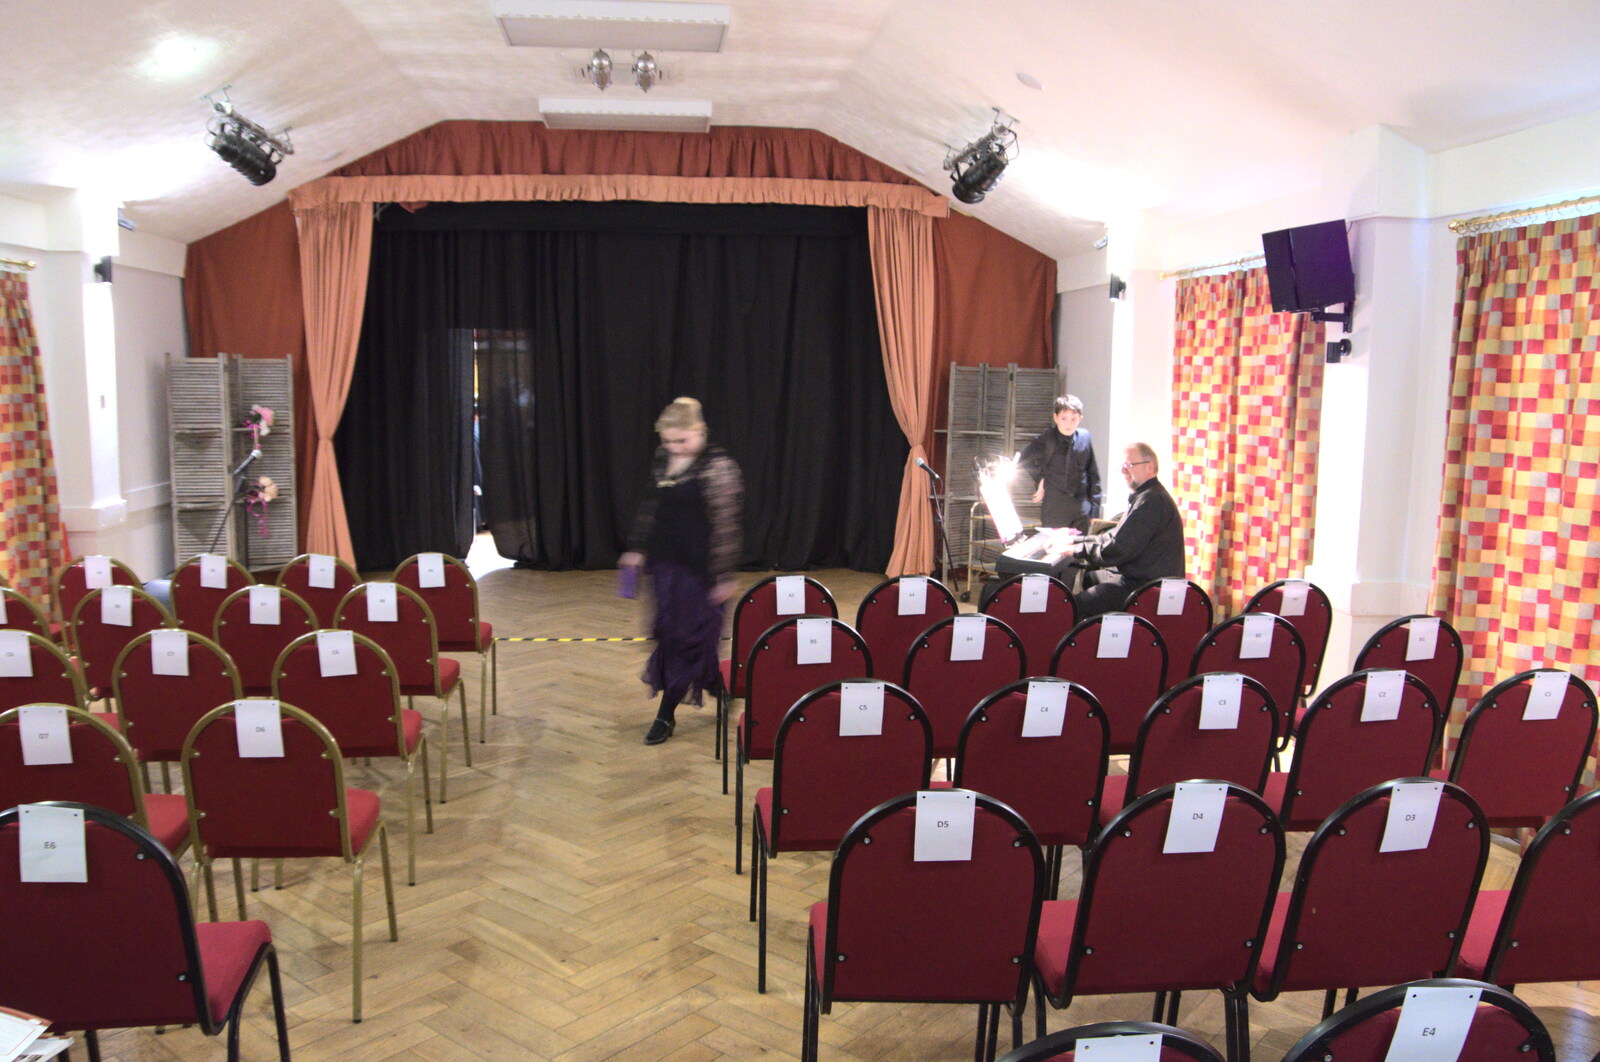 The village hall is set up for the performance from Palgrave Players and Weybread Canoes, Harleston - 16th April 2023